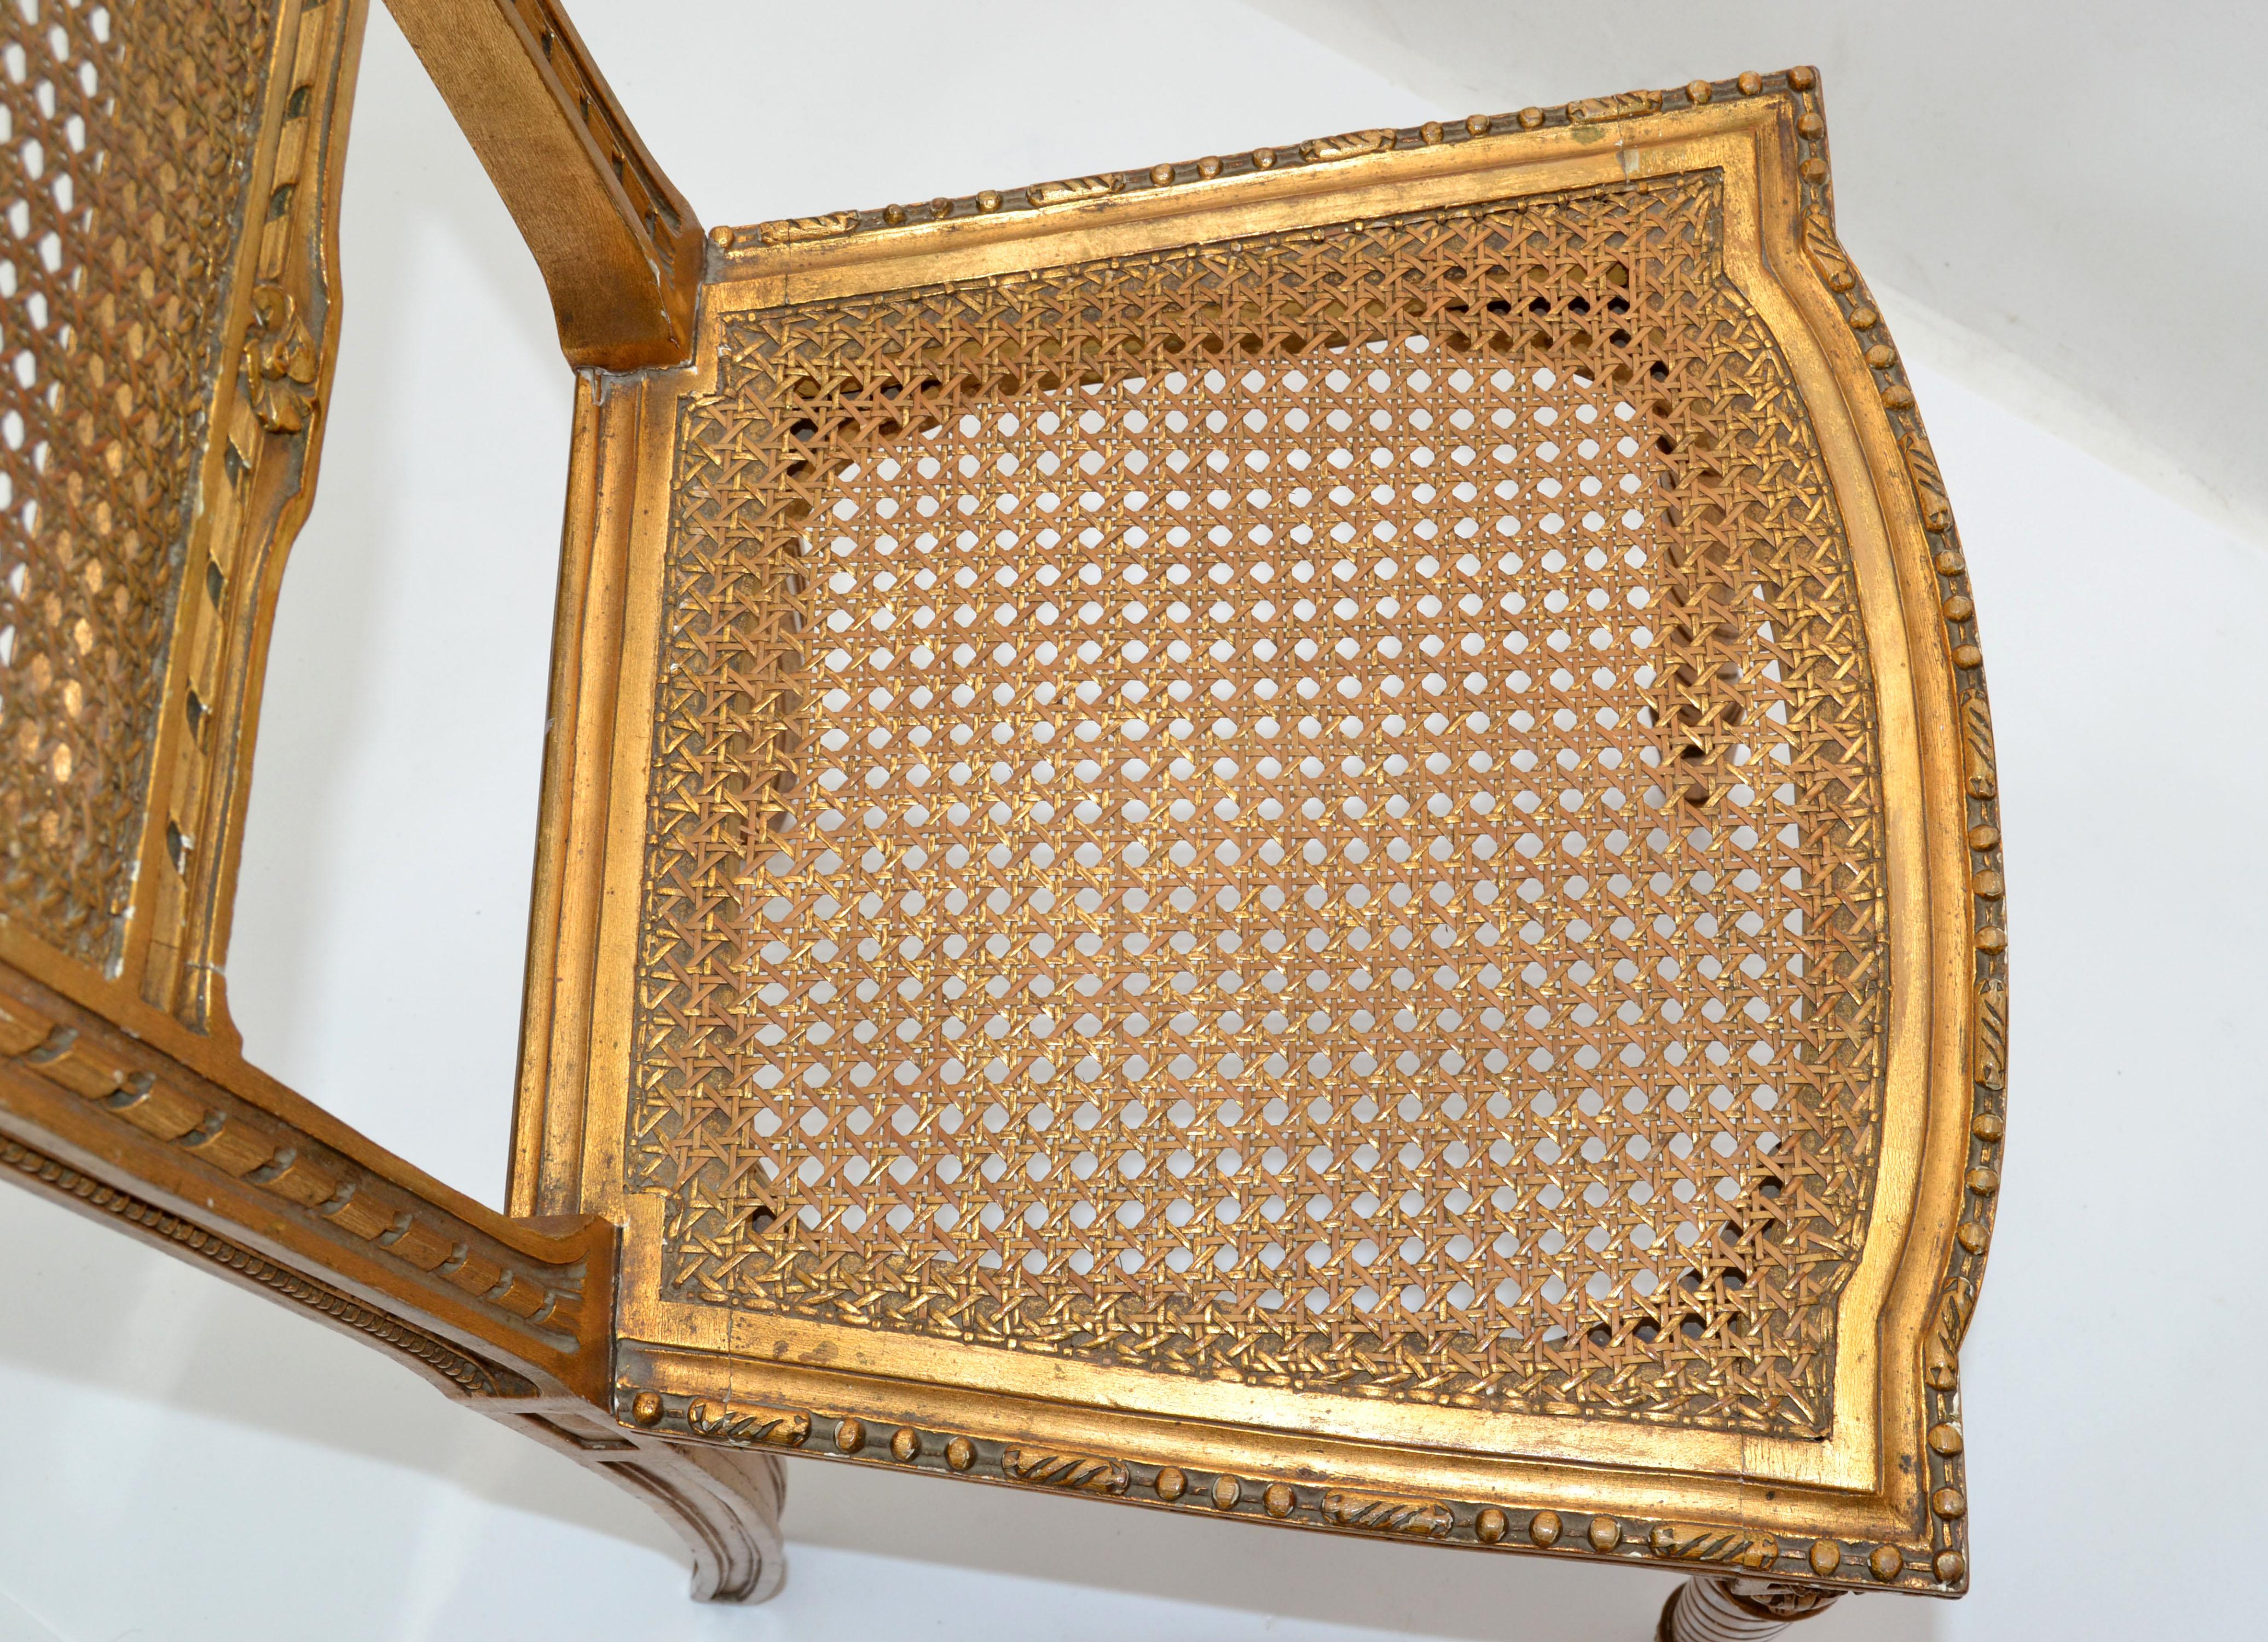 Mid-20th Century Carved & Turned Gilt Wood Vanity Chair Hollywood Regency Woven Cane Seat Italy For Sale